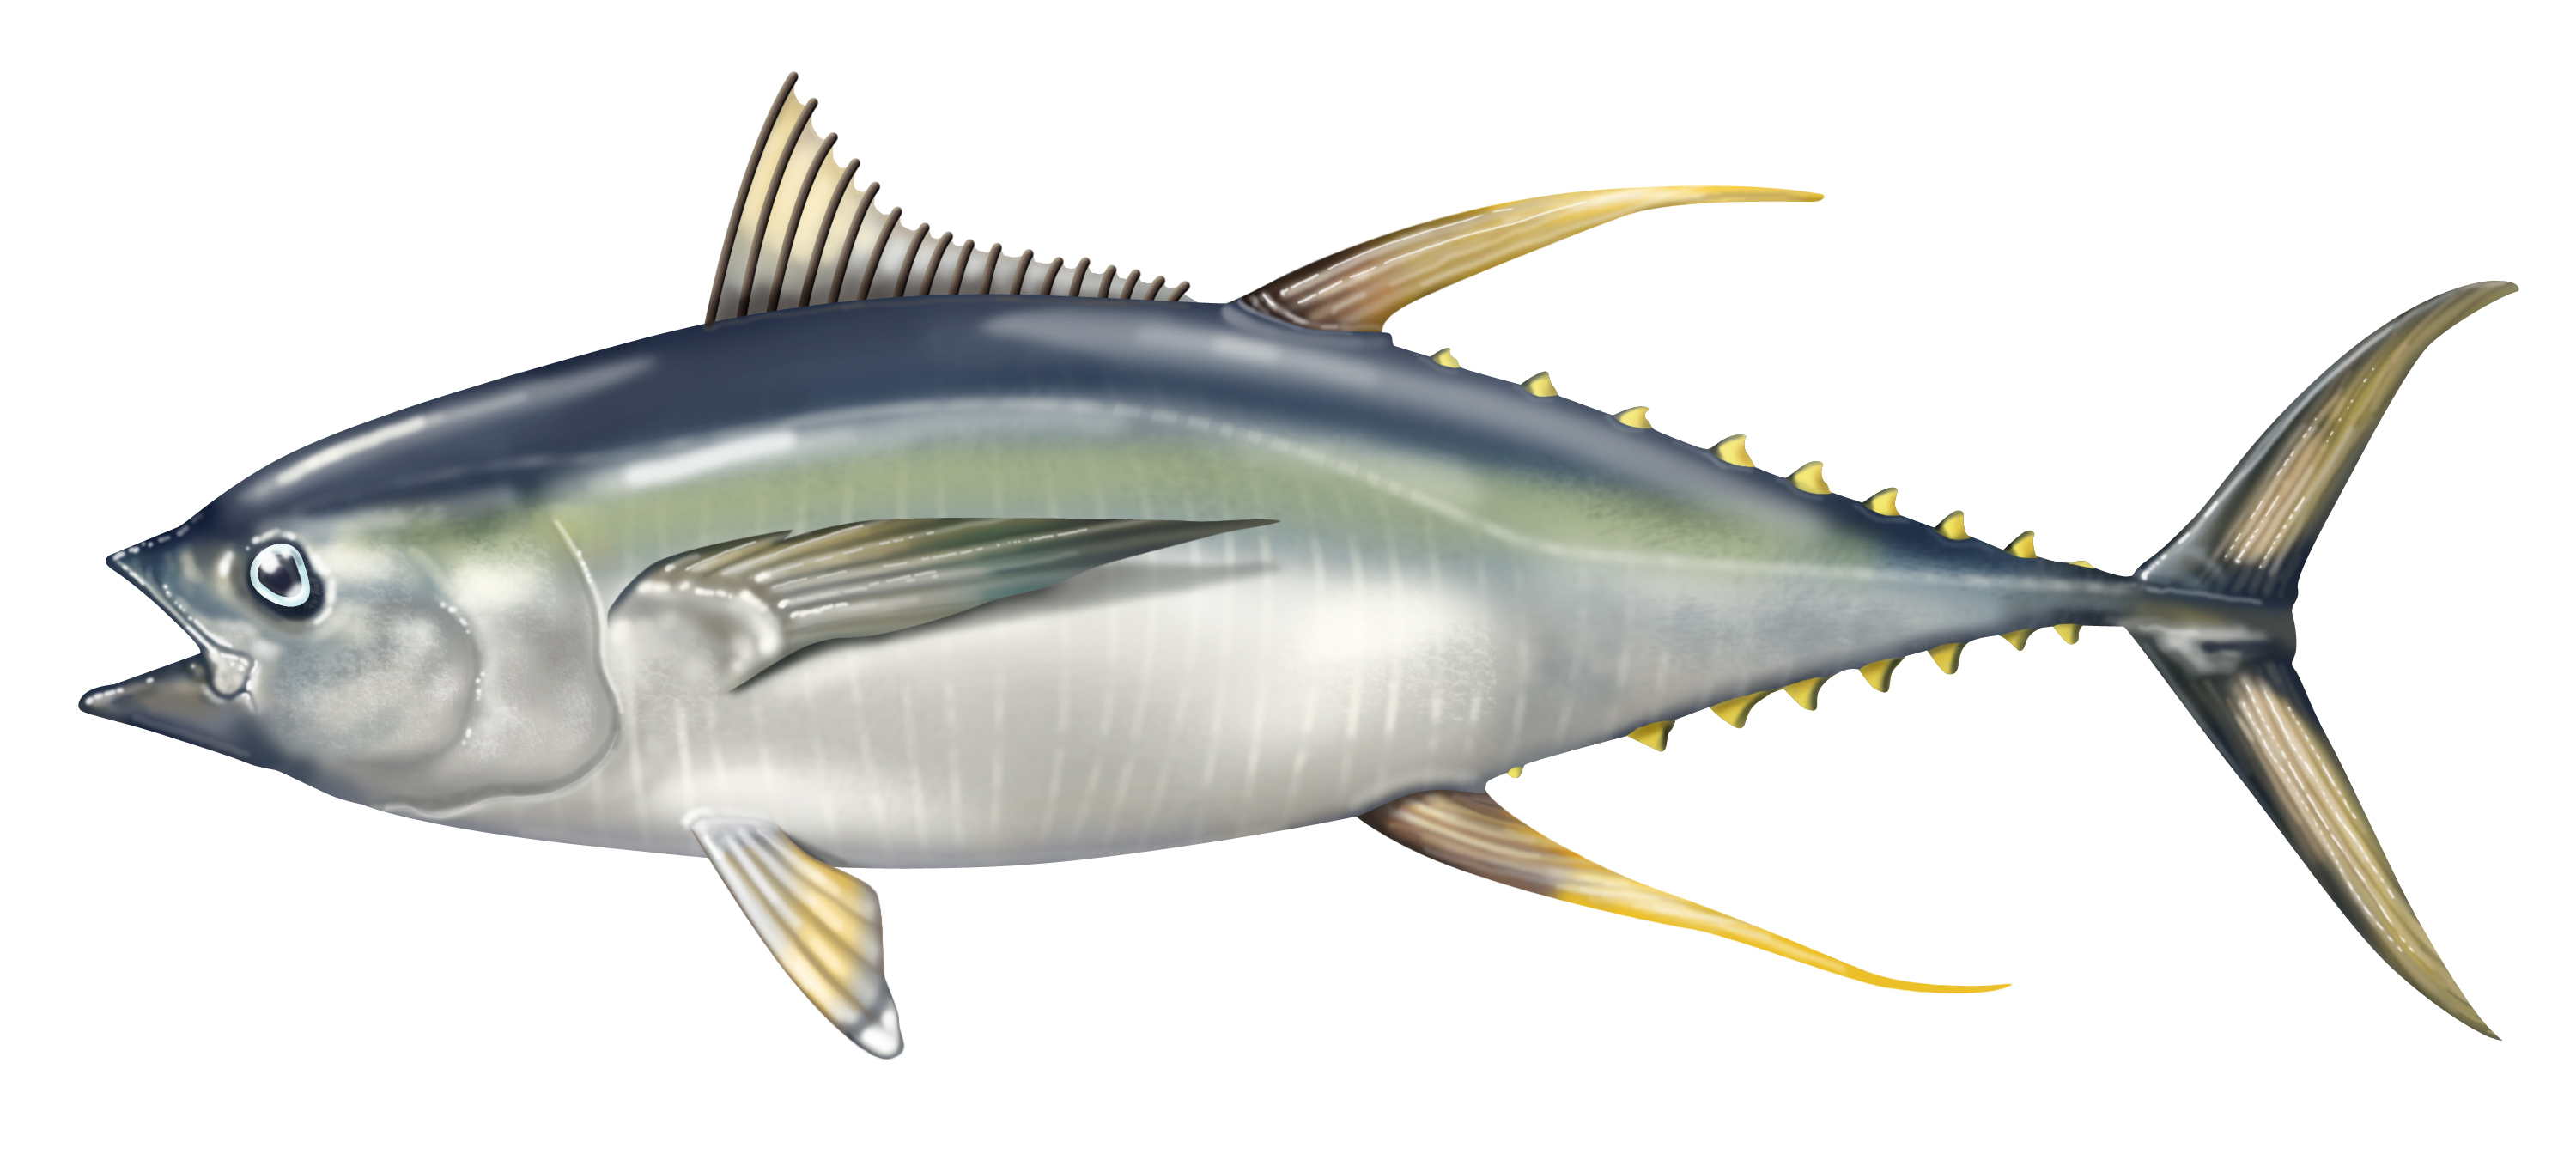 Images of Tuna | 3000x1358